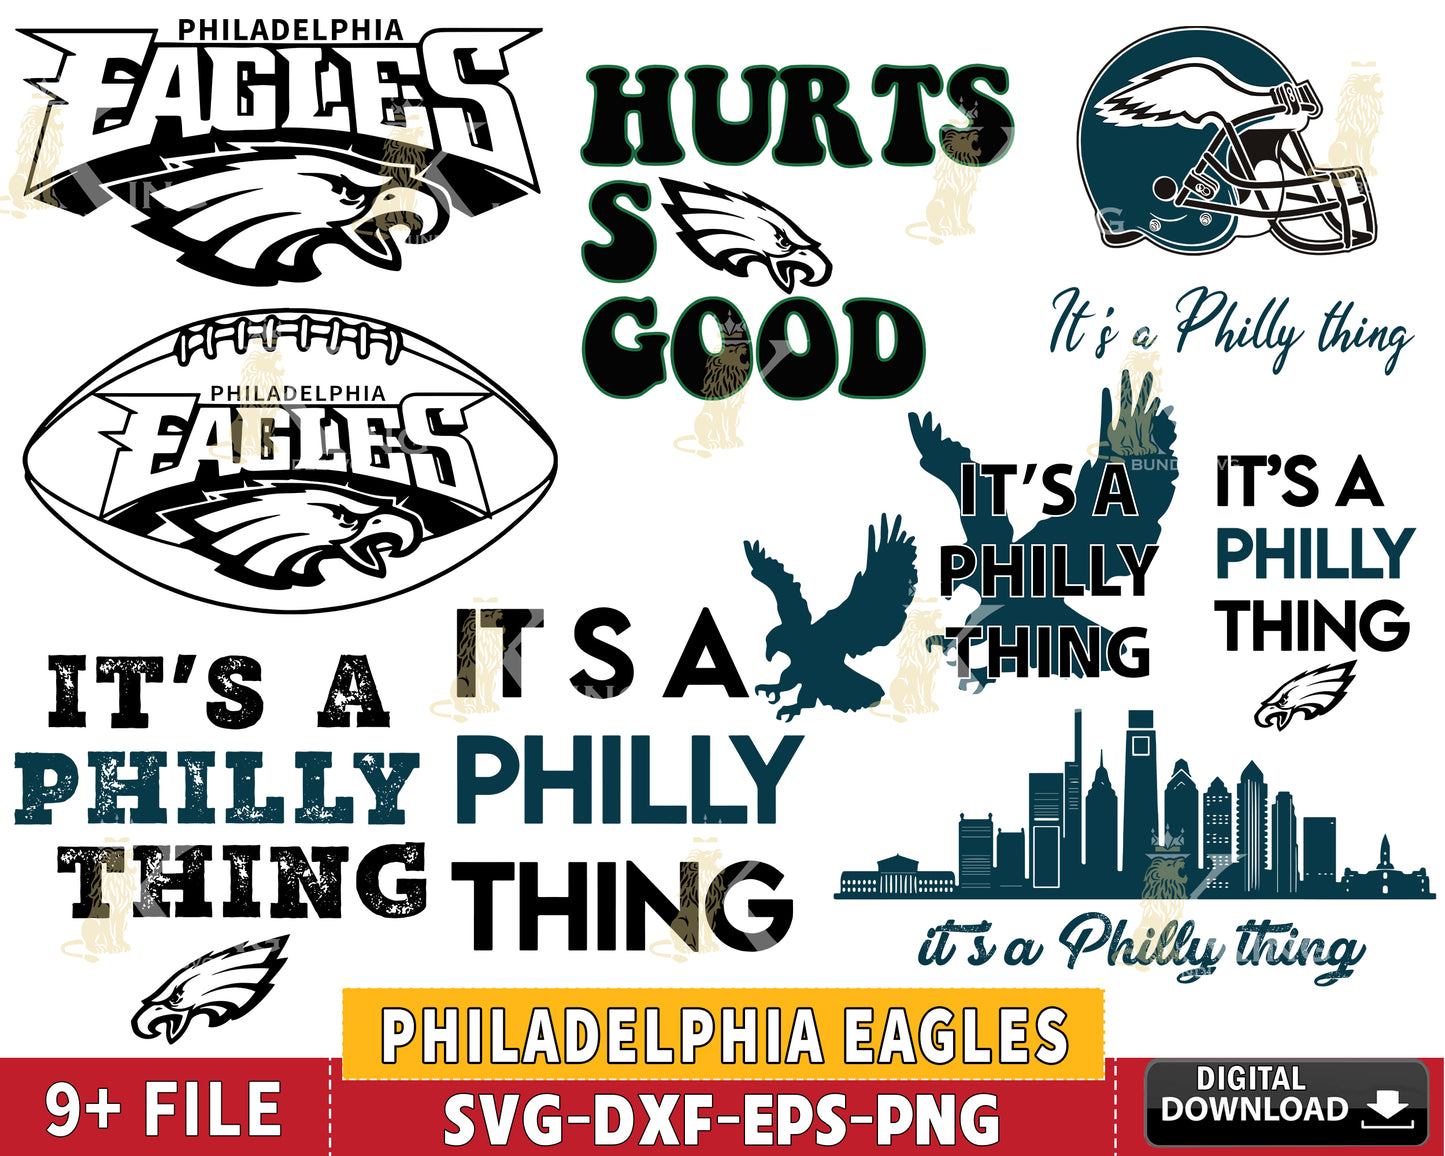 It's A Philly Thing Philadelphia Eagles SVG, Philadelphia Eagles SVG,  Football SVG